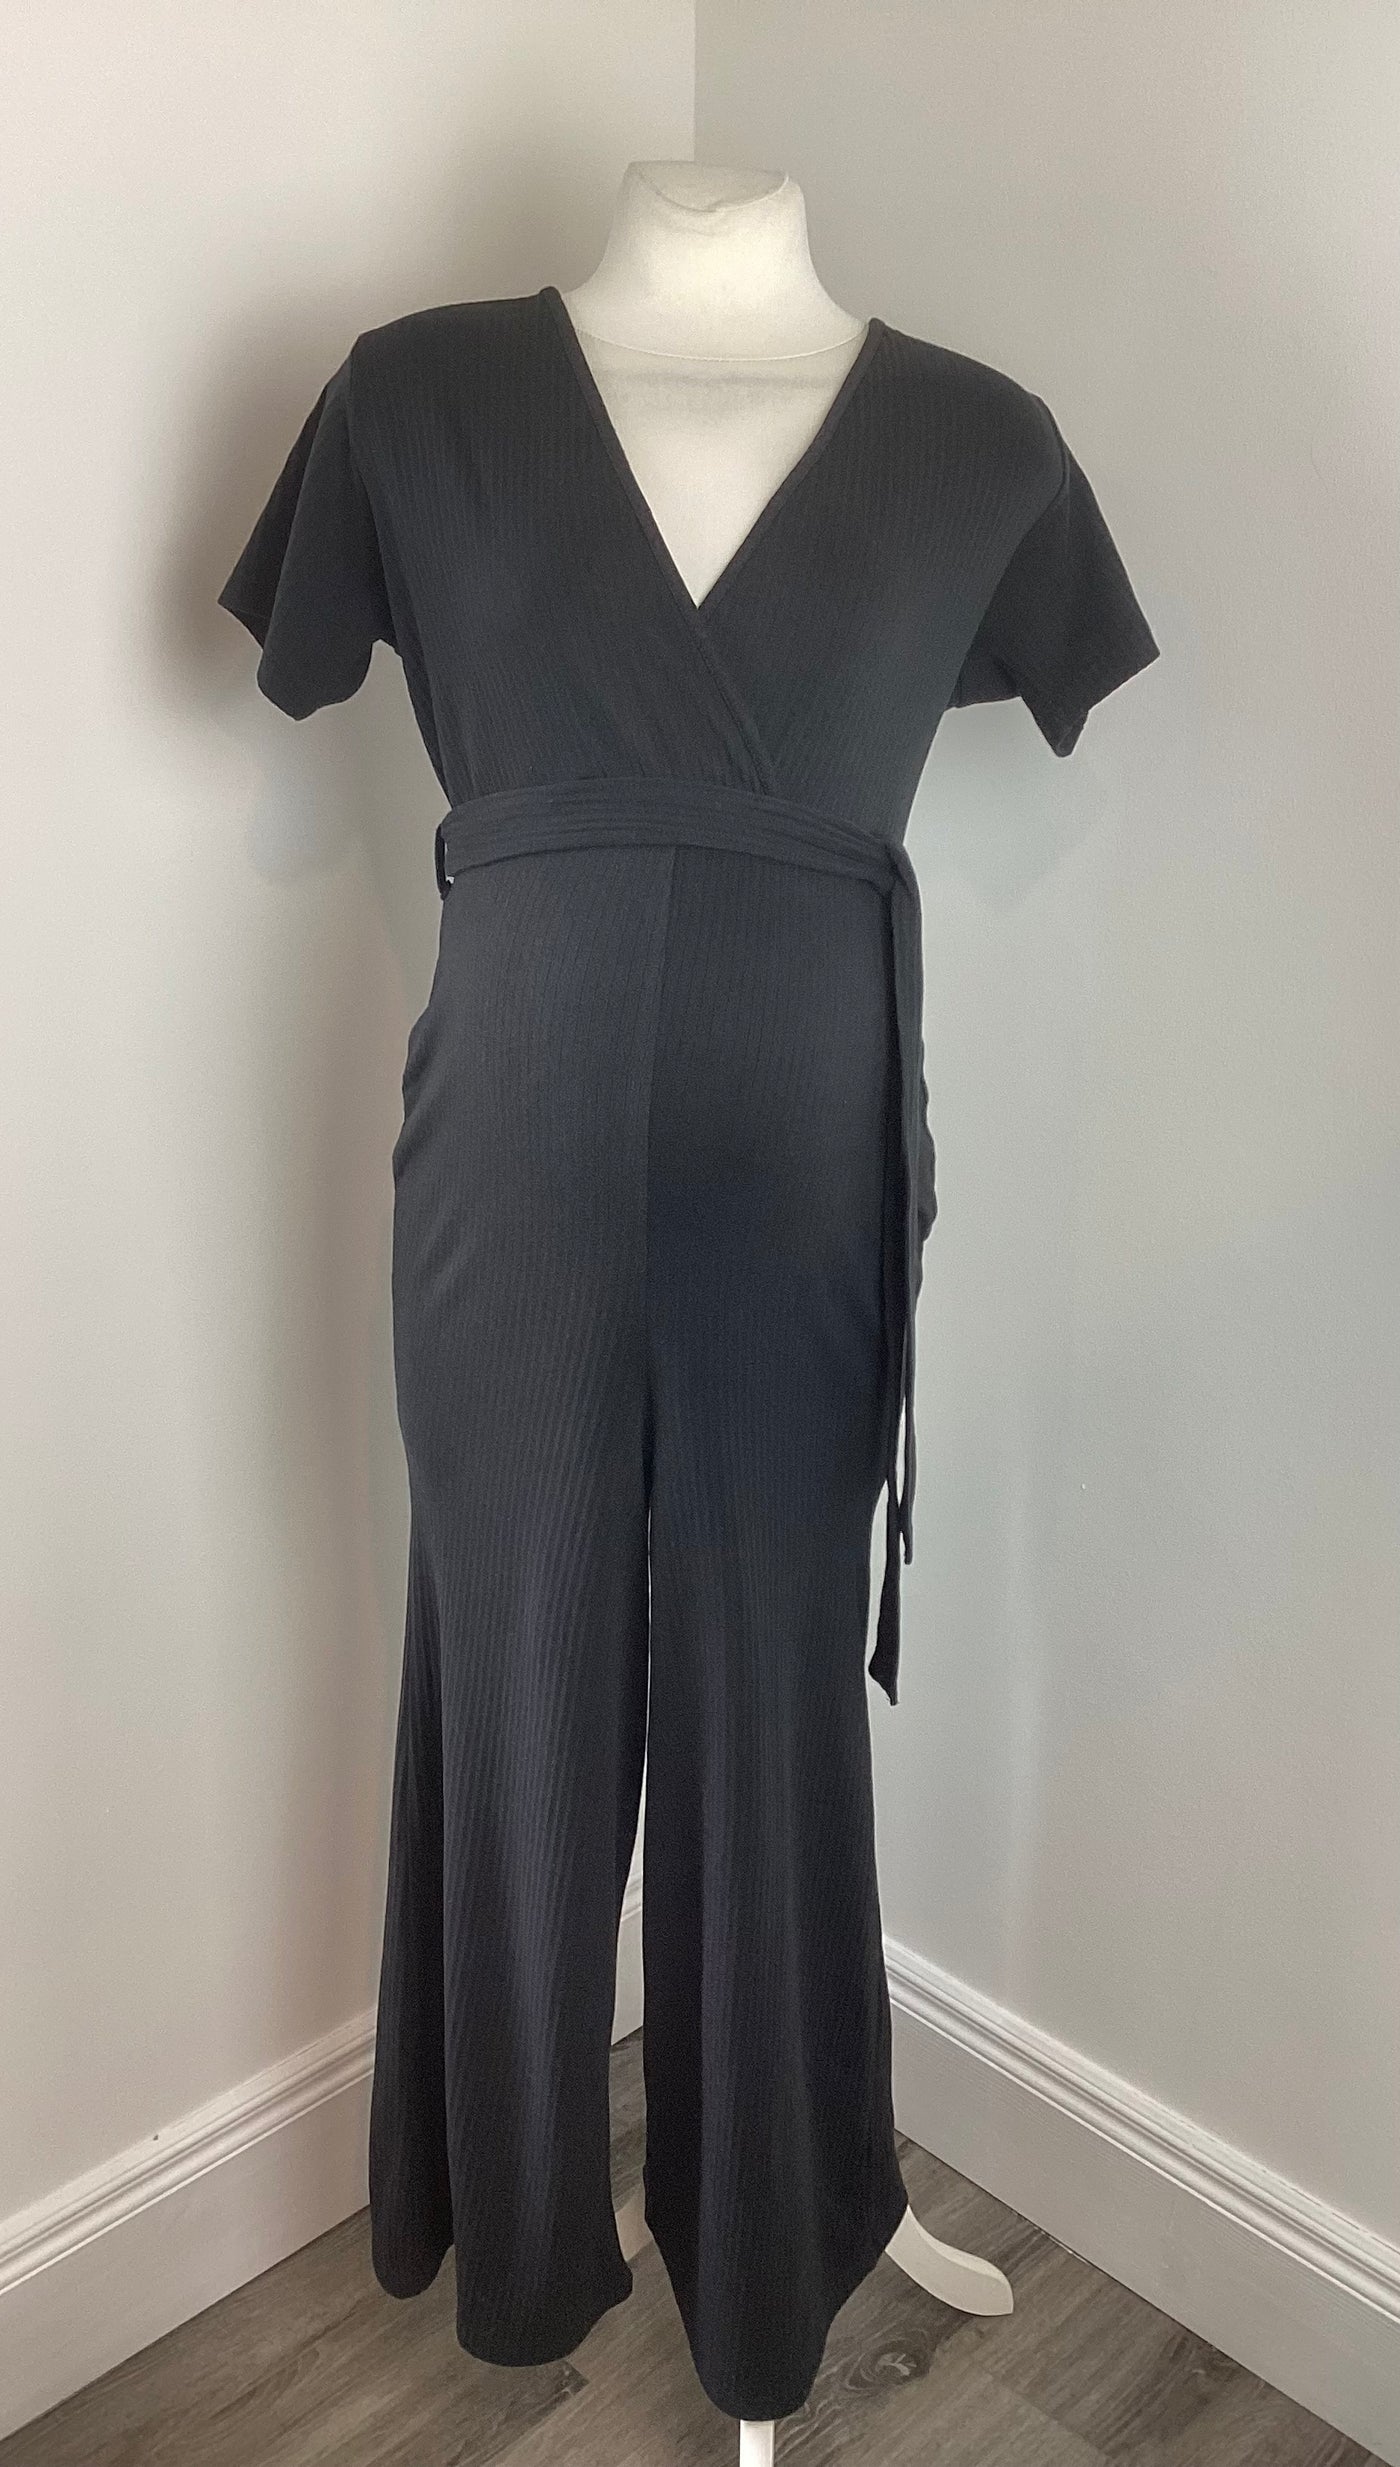 Misguided Maternity black ribbed wide leg jumpsuit with waist tie - Size 18 (more like 16)